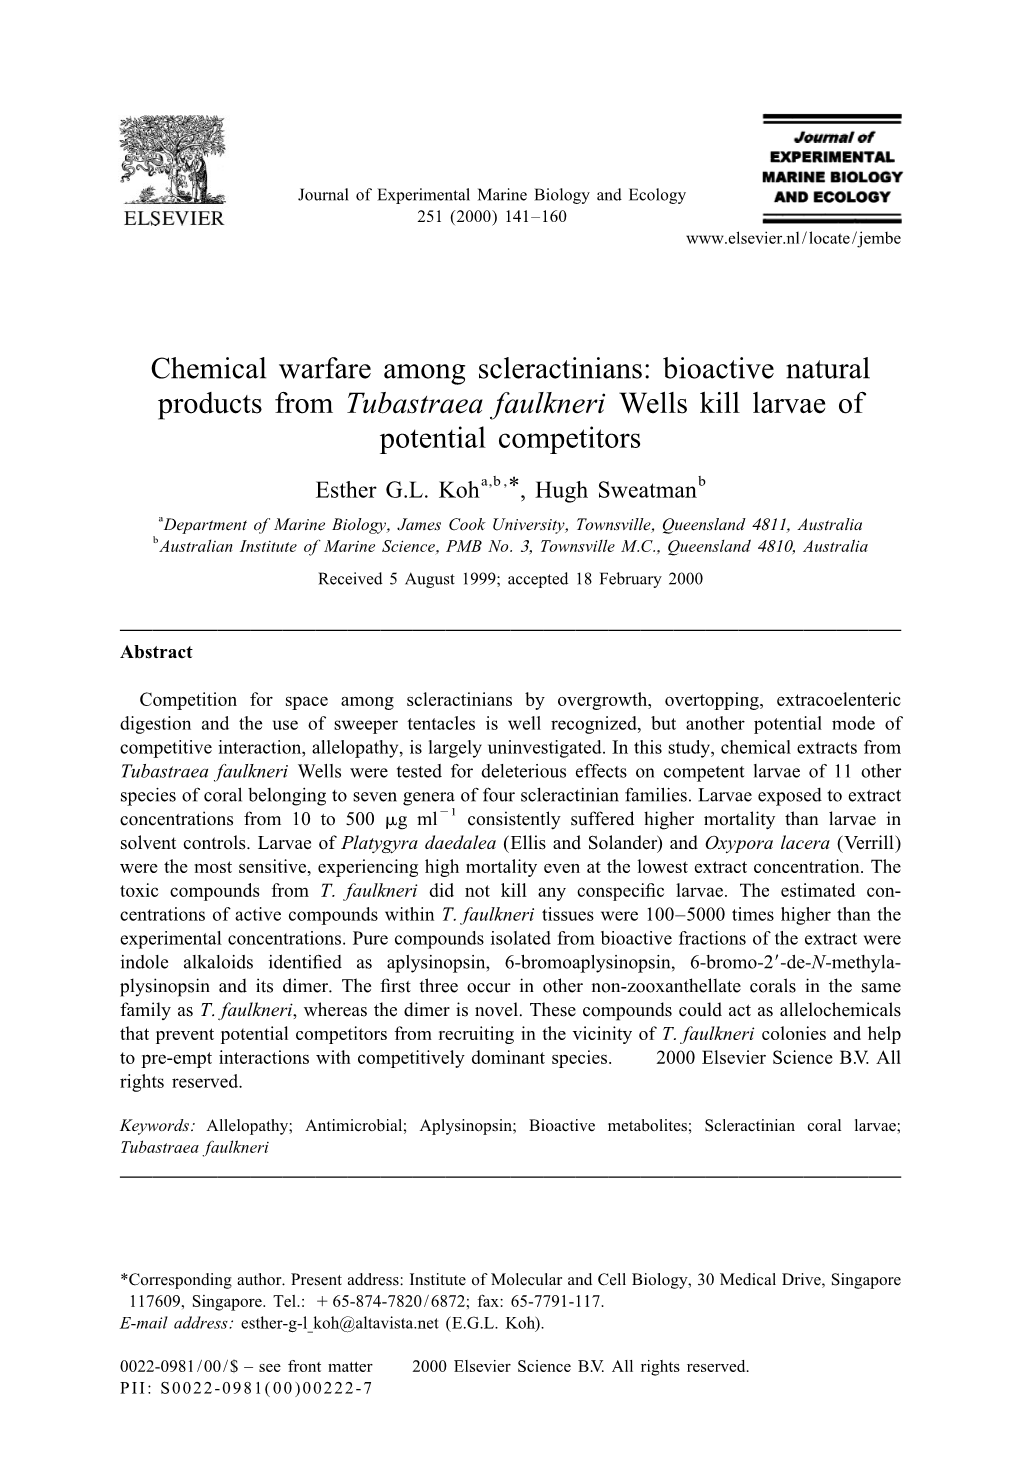 Bioactive Natural Products from Tubastraea Faulkneri Wells Kill Larvae of Potential Competitors